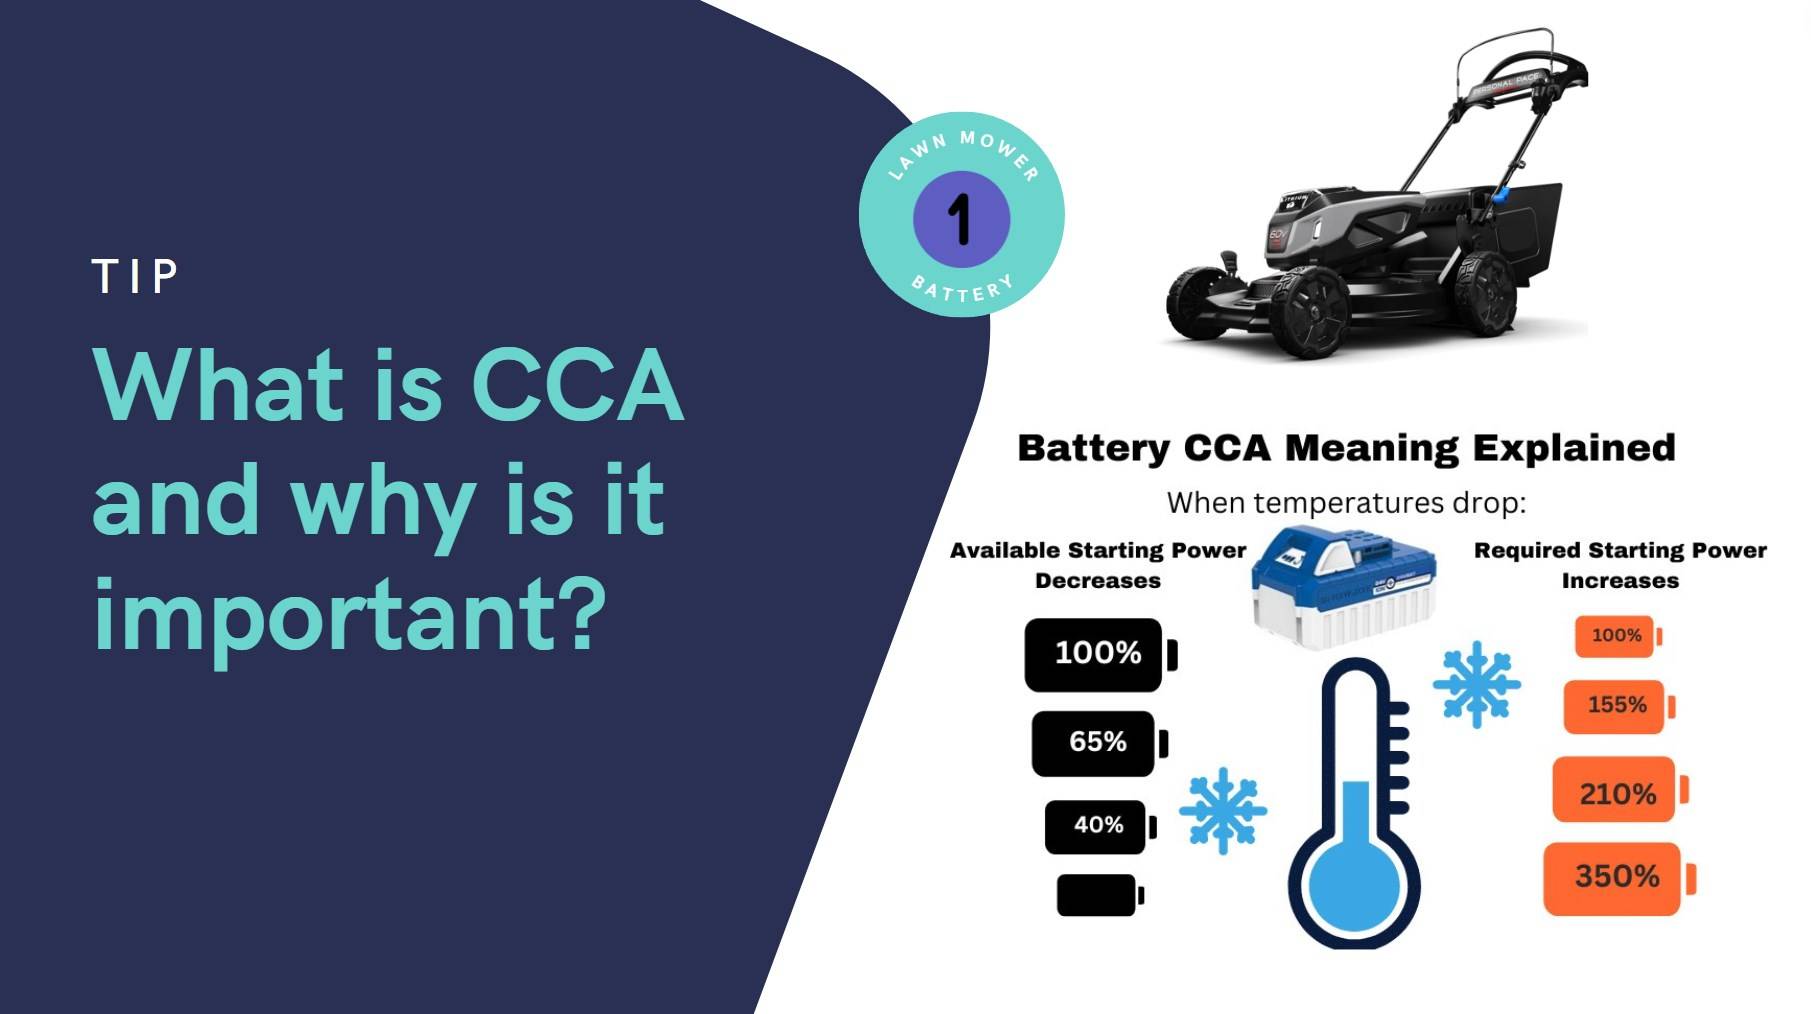 What is CCA and why is it important? How many CCA should a lawn mower battery have?